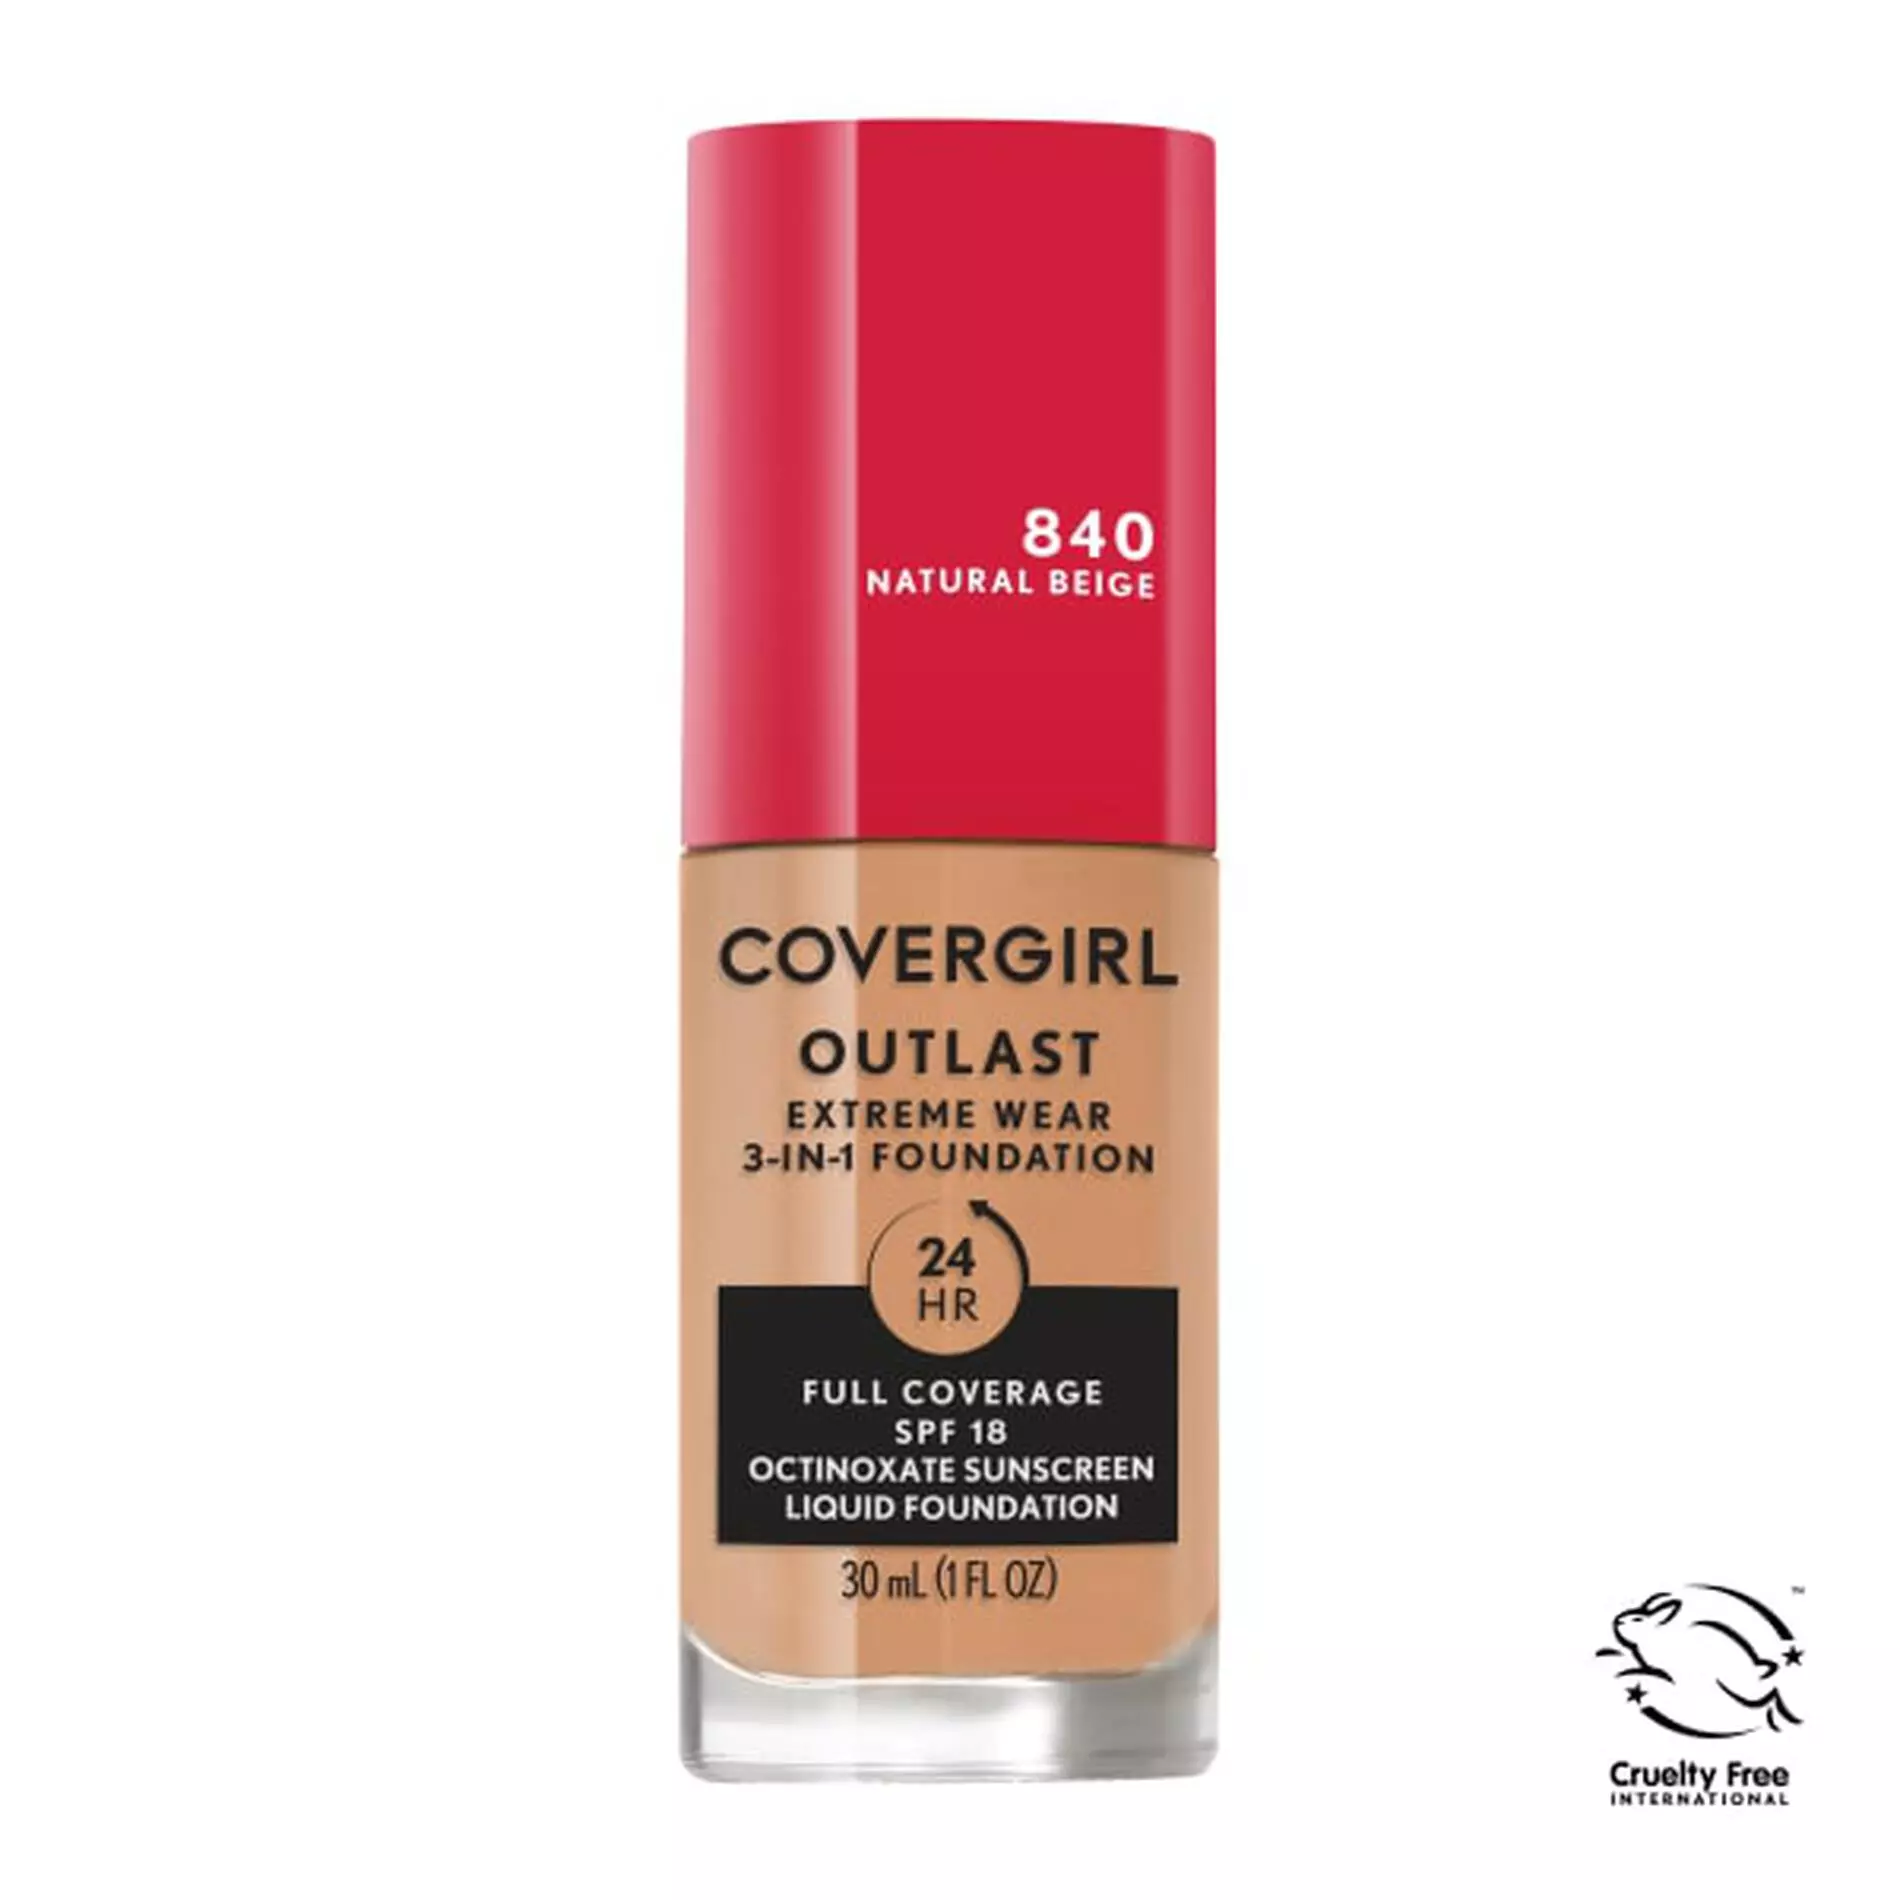 COVERGIRL Outlast Extreme Wear 3-in-1Foundation